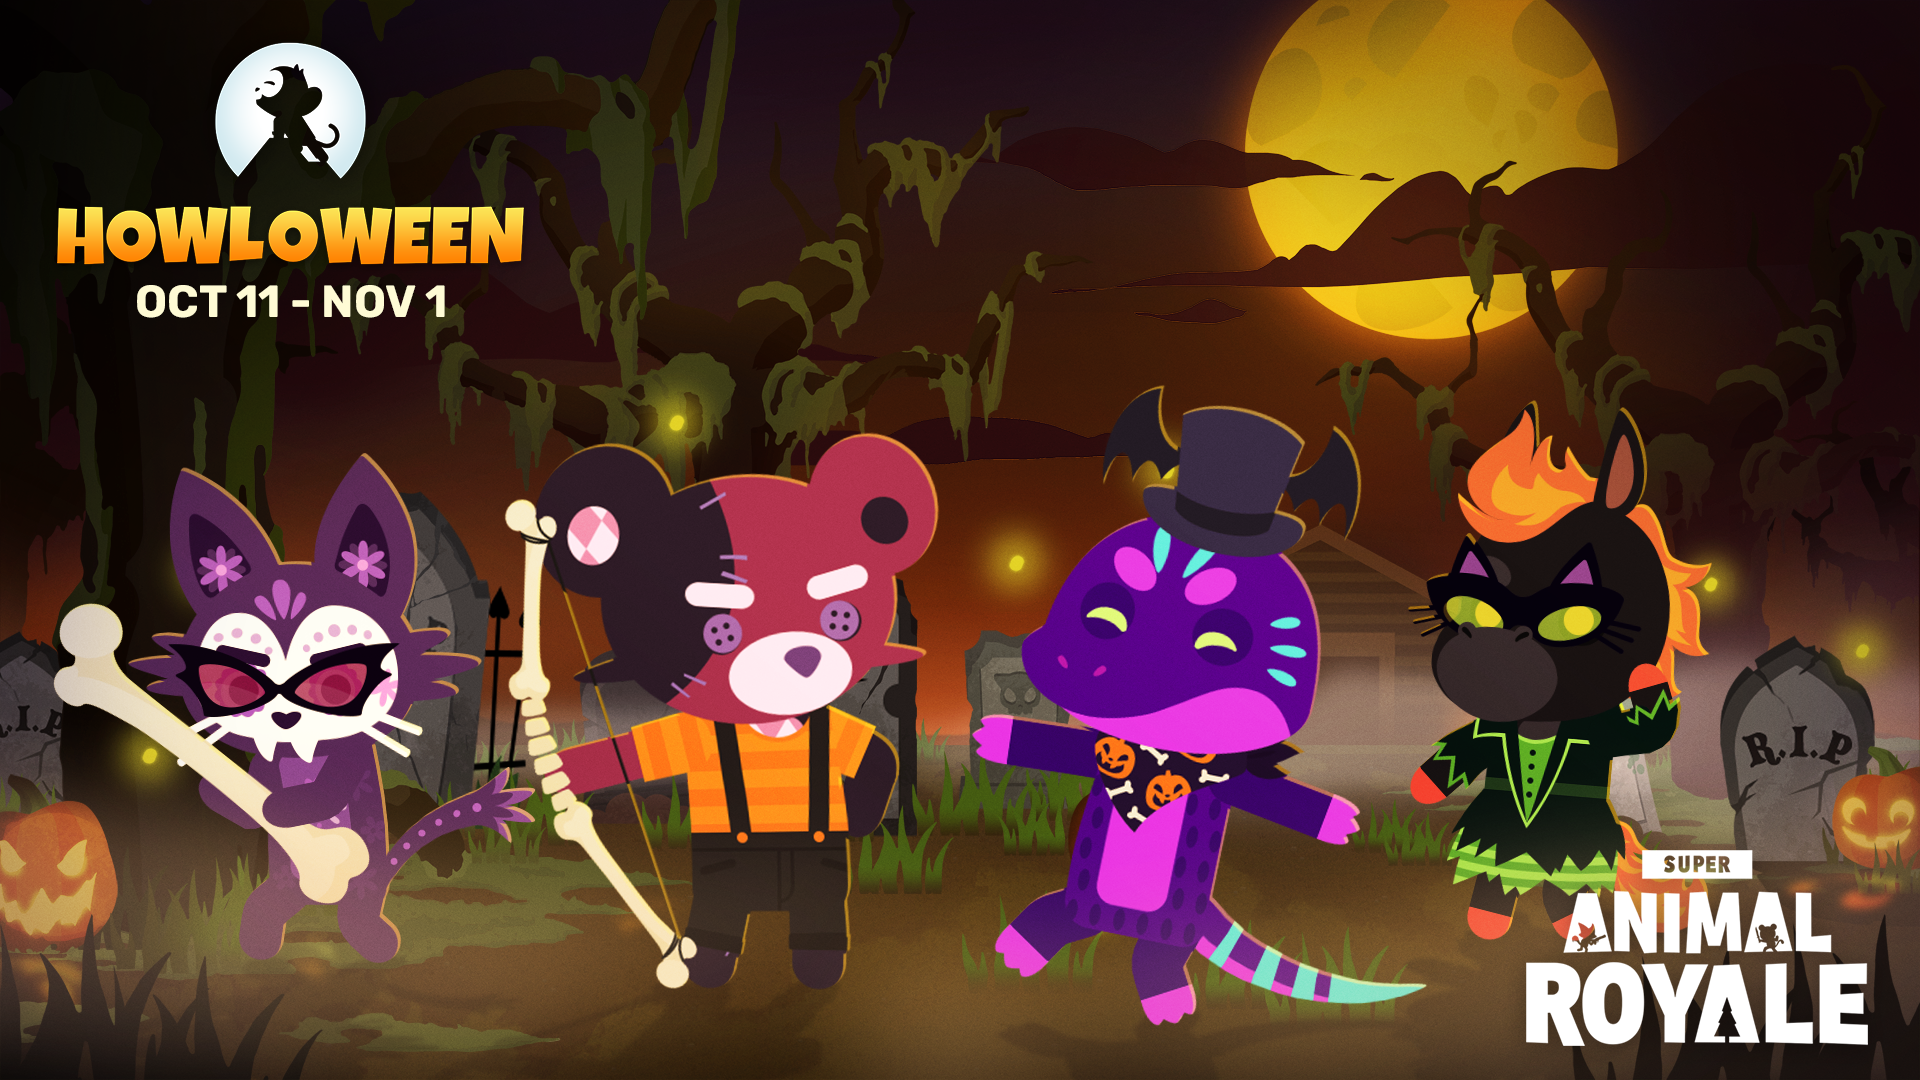 Steam :: Super Animal Royale :: Howloween Comes Screaming Back to the  Island!